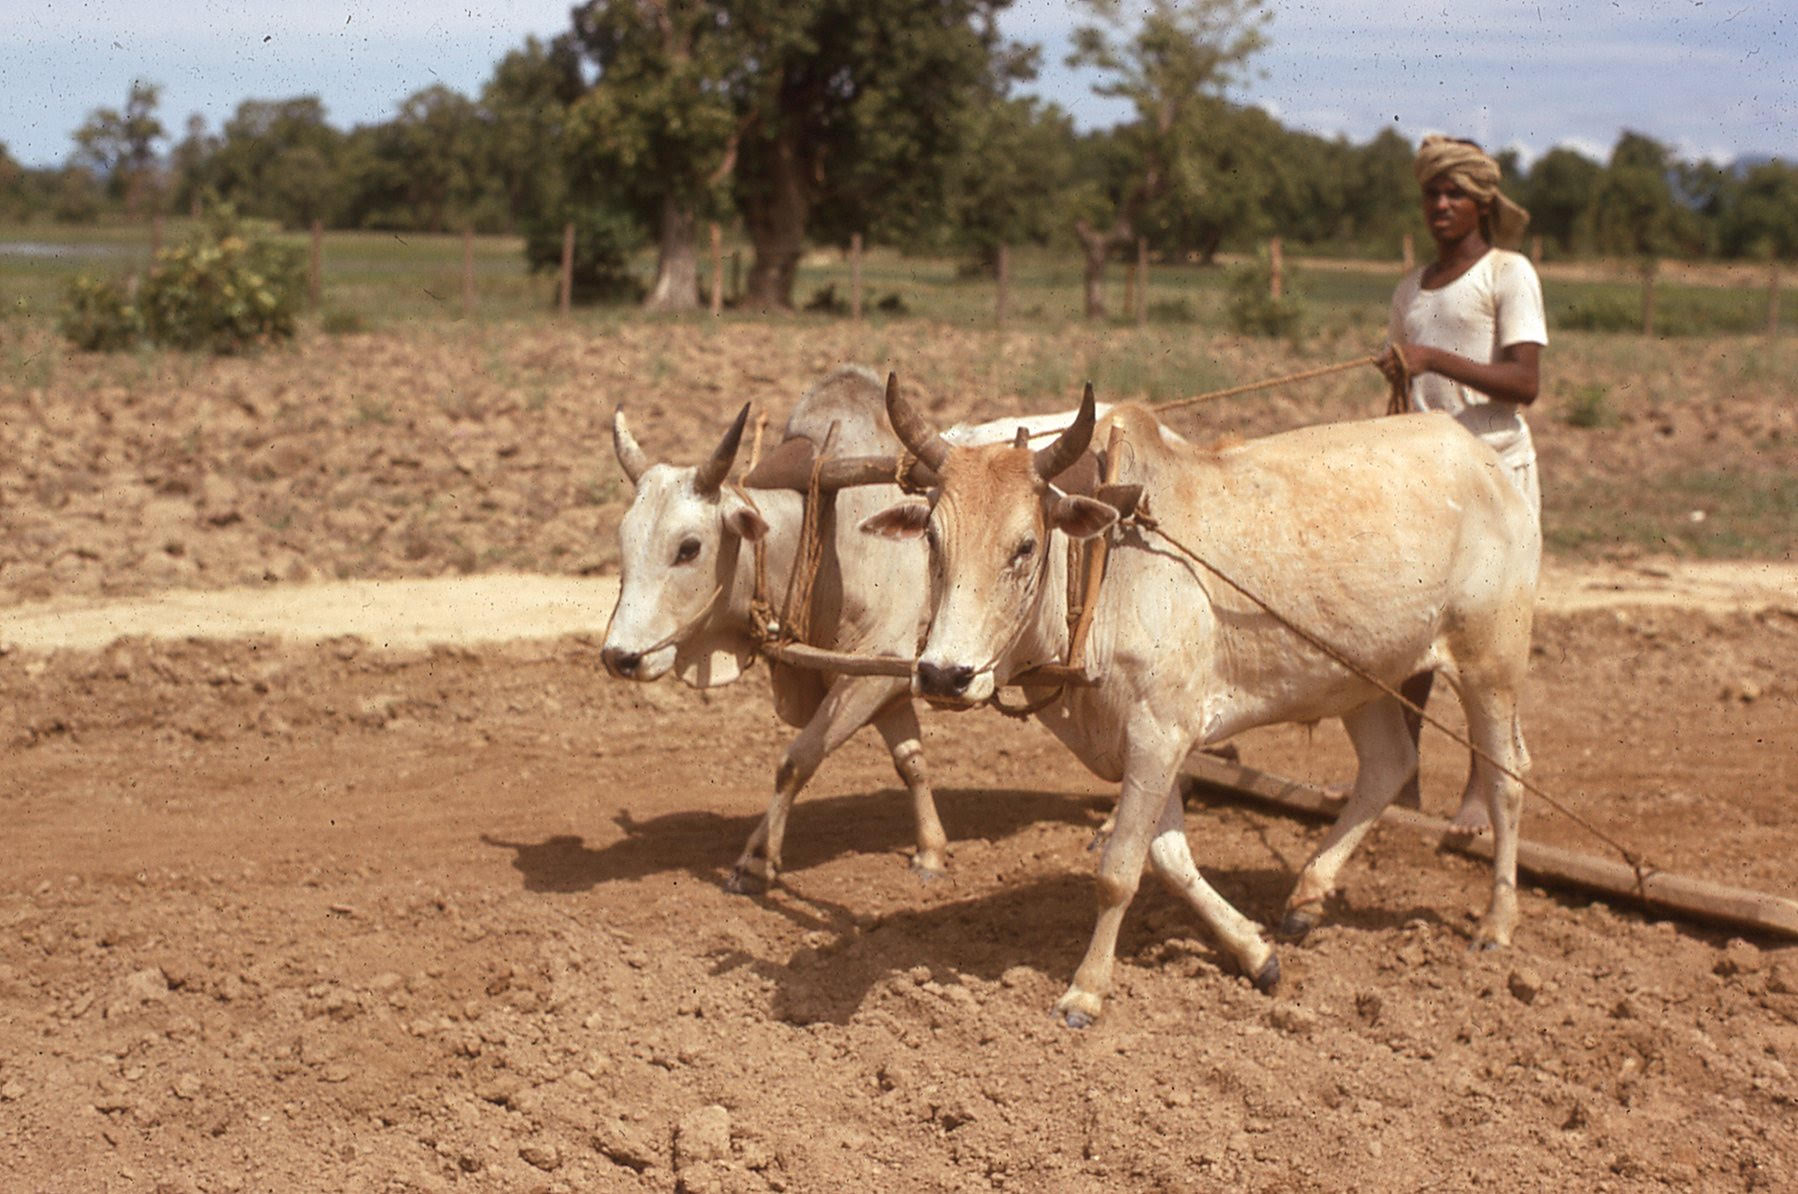 Landscape in Nepal of a muddy field. Two oxen plow the field led by a man from the village.